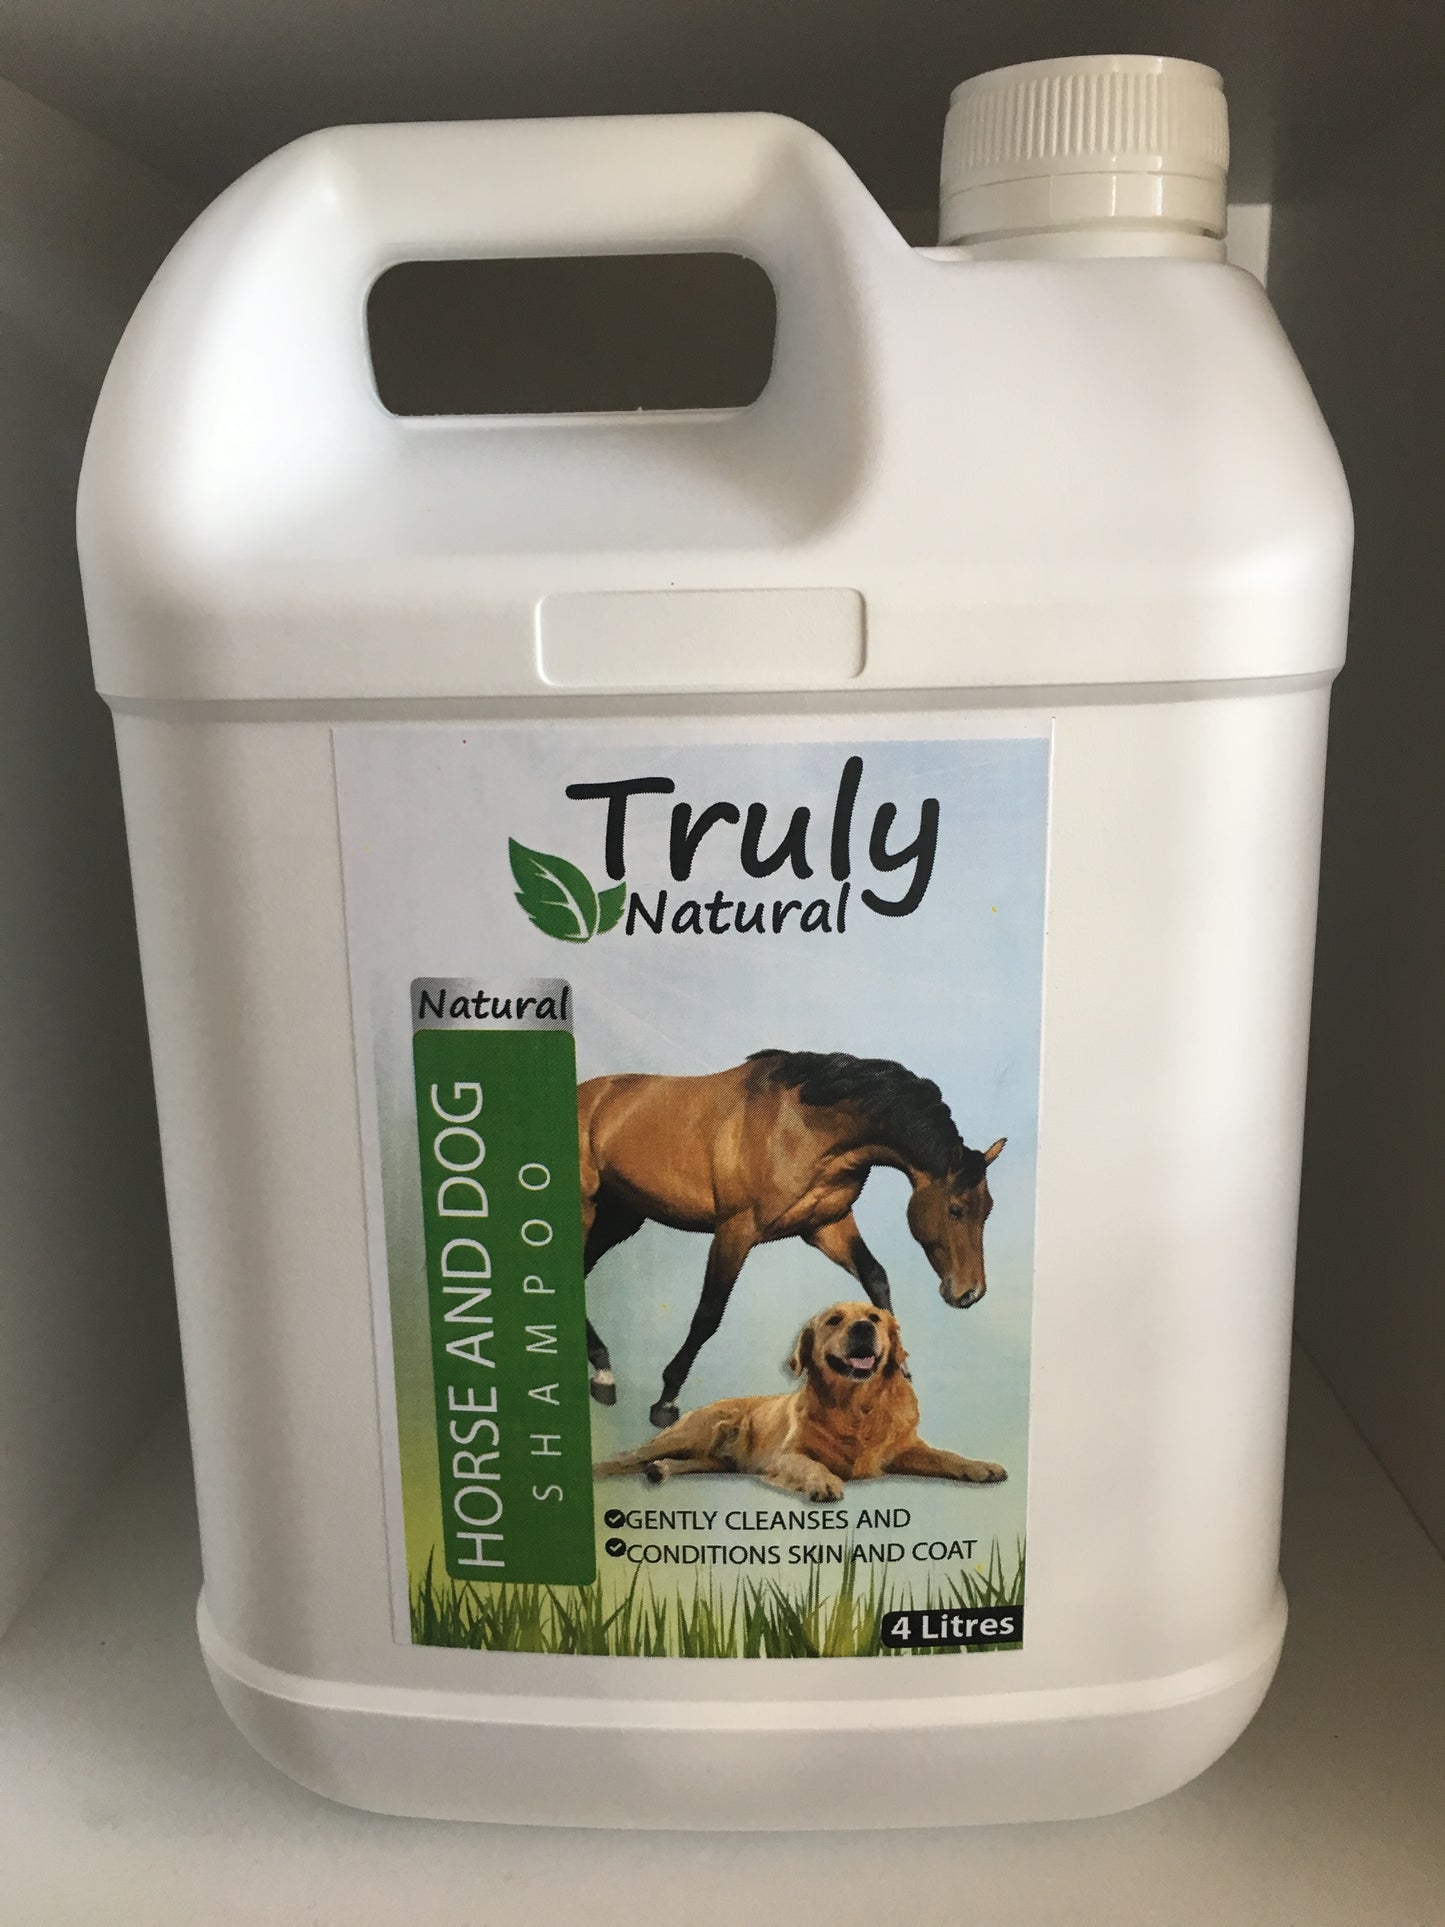 Wholesale Truly Natural dog and horse shampoo 4 litre